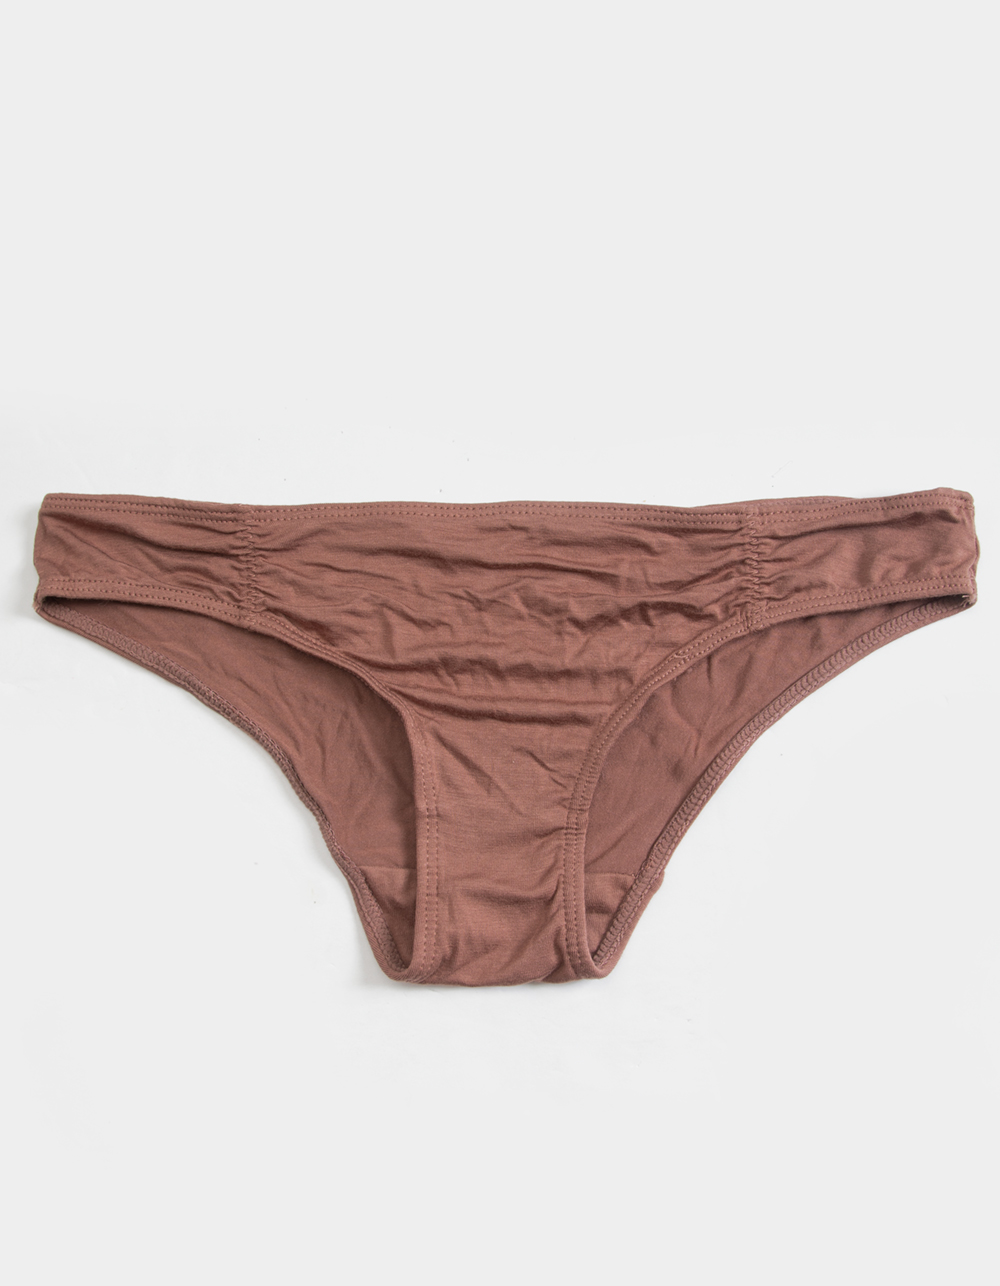 Ruched Cheeky Panties